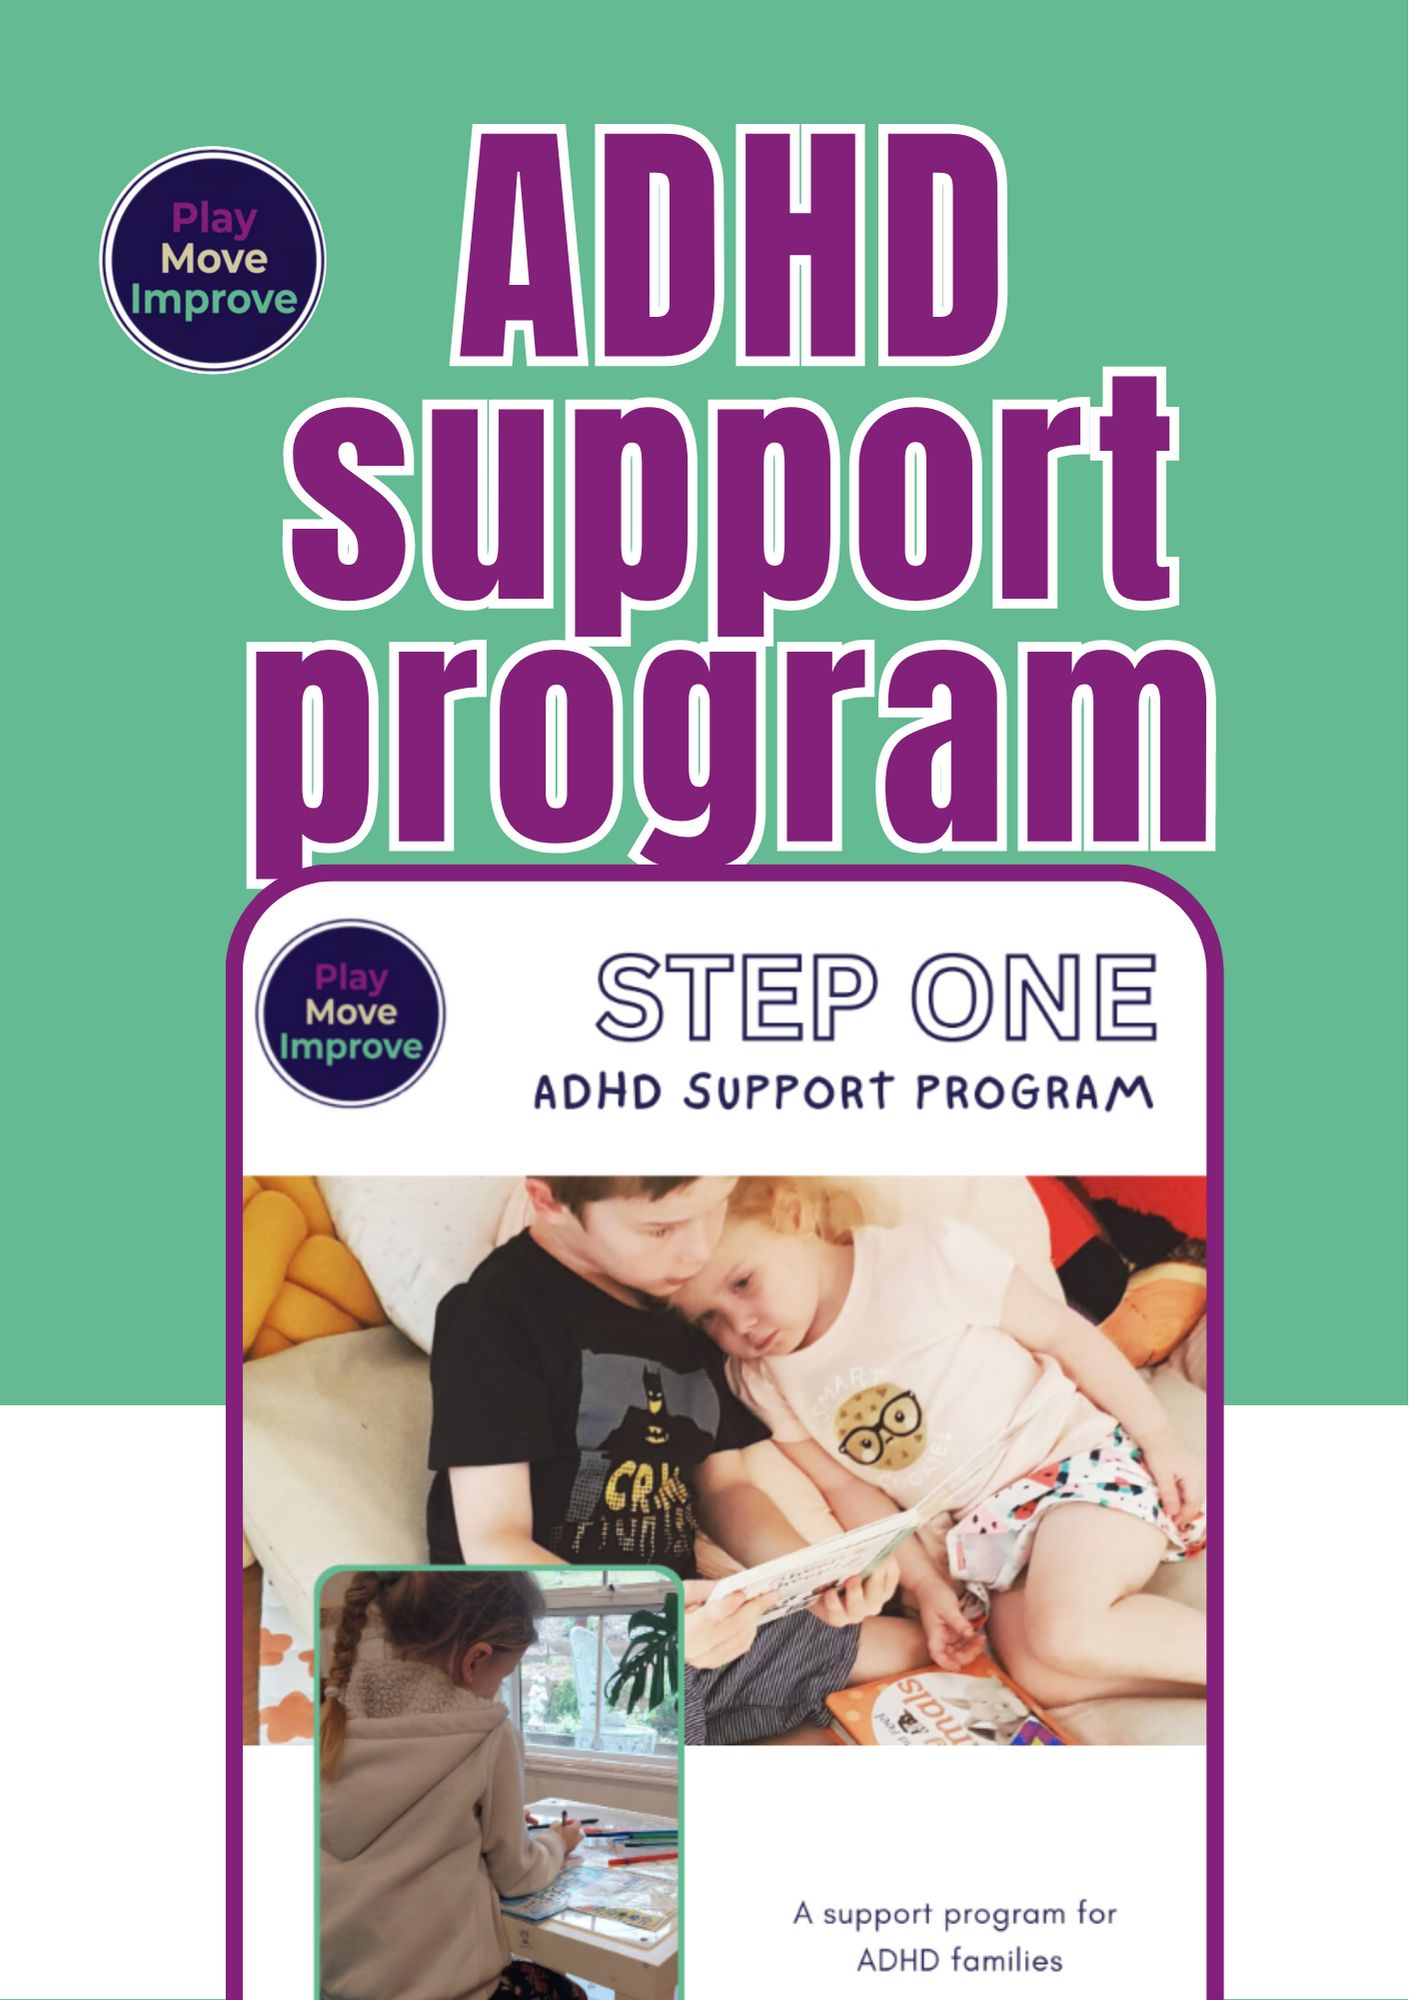 ADHD Support Program for Stress-Free Mornings. Personalized Training and Strategies for Families with Children with ADHD. Enhance Morning Routines and Reduce Stress with Customized ADHD Support